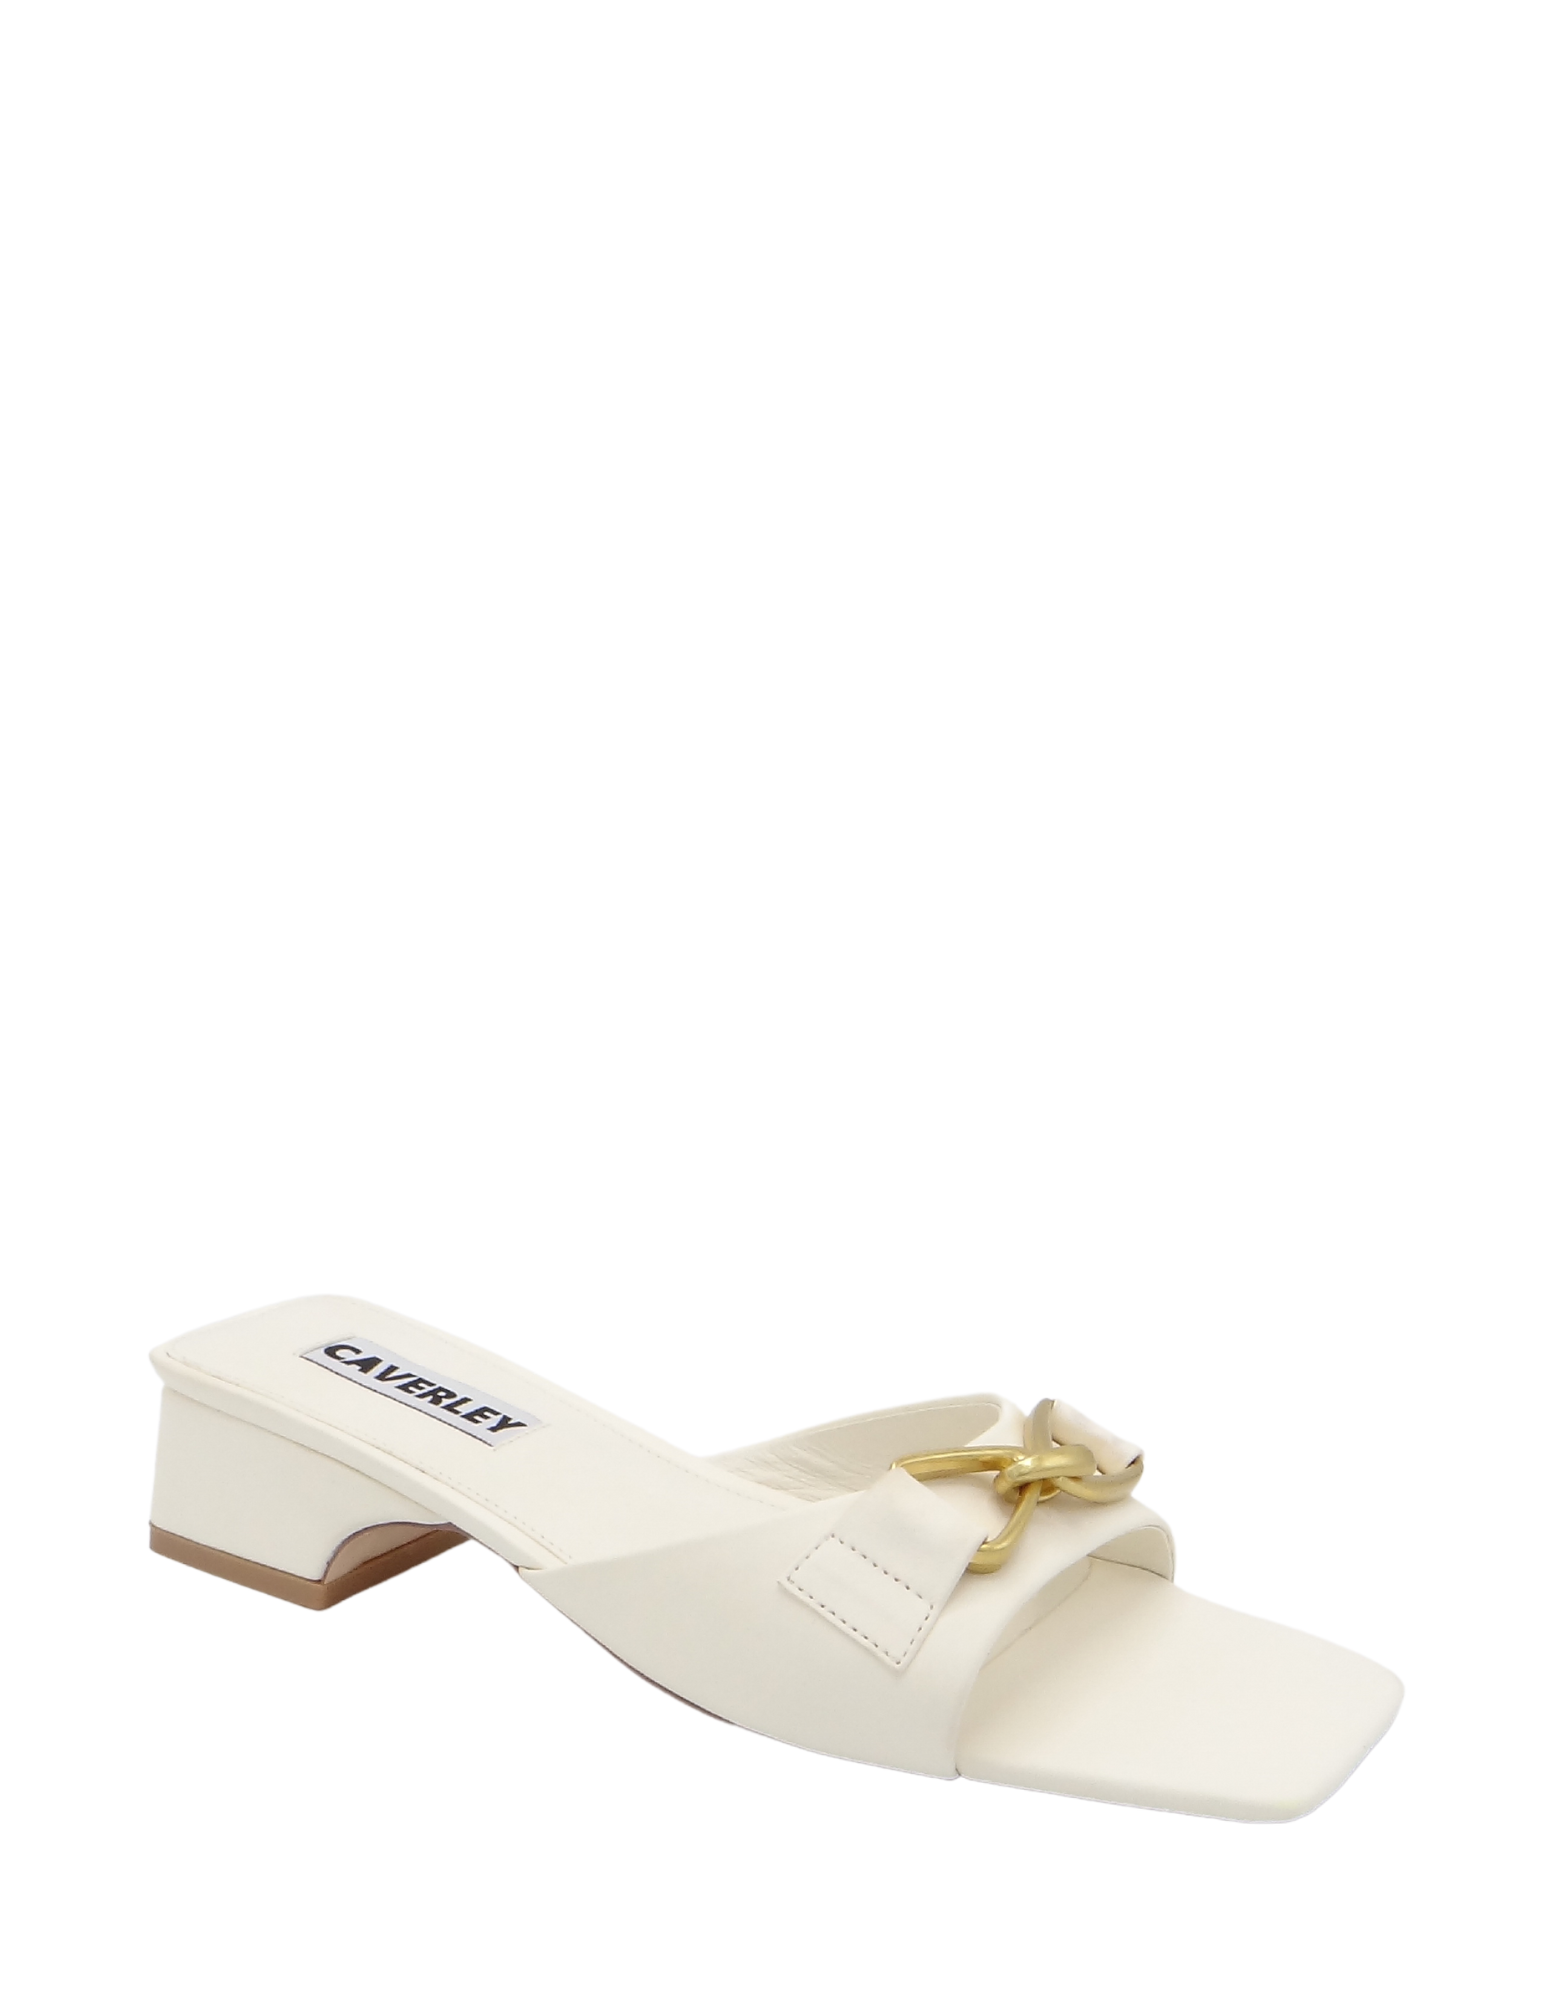 CAVERLEY Mason Mule in Ivory 23S505C Ivory FROM EIGHTYWINGOLD - OFFICIAL BRAND PARTNER